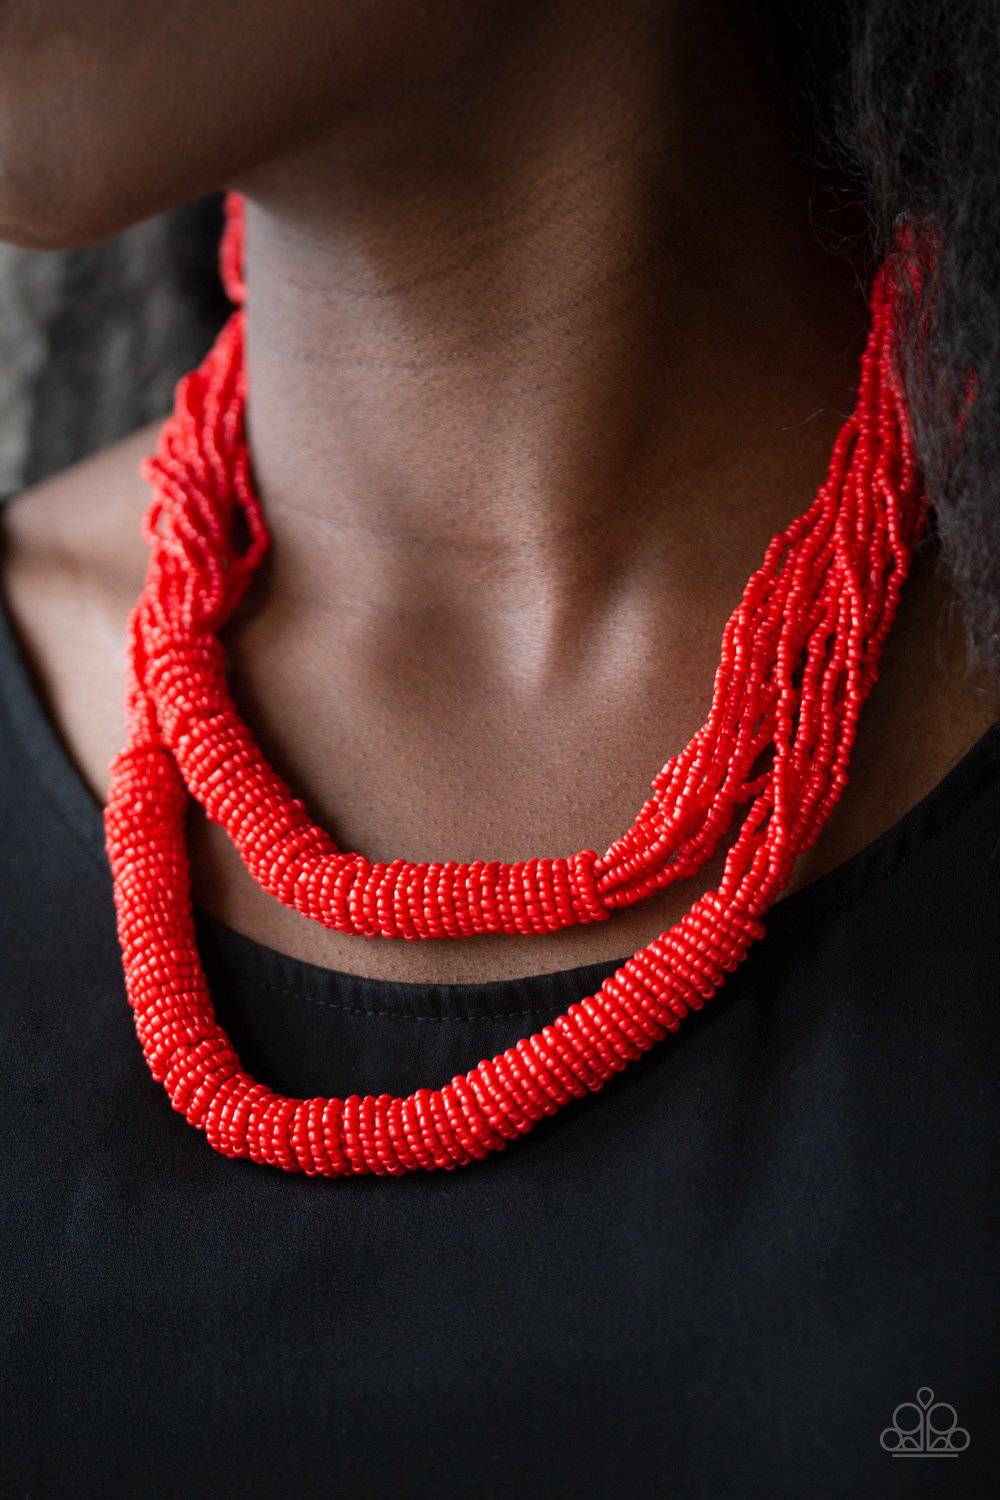 Right As RAINFOREST - Red Seed Bead Necklace - Paparazzi Accessories - GlaMarous Titi Jewels